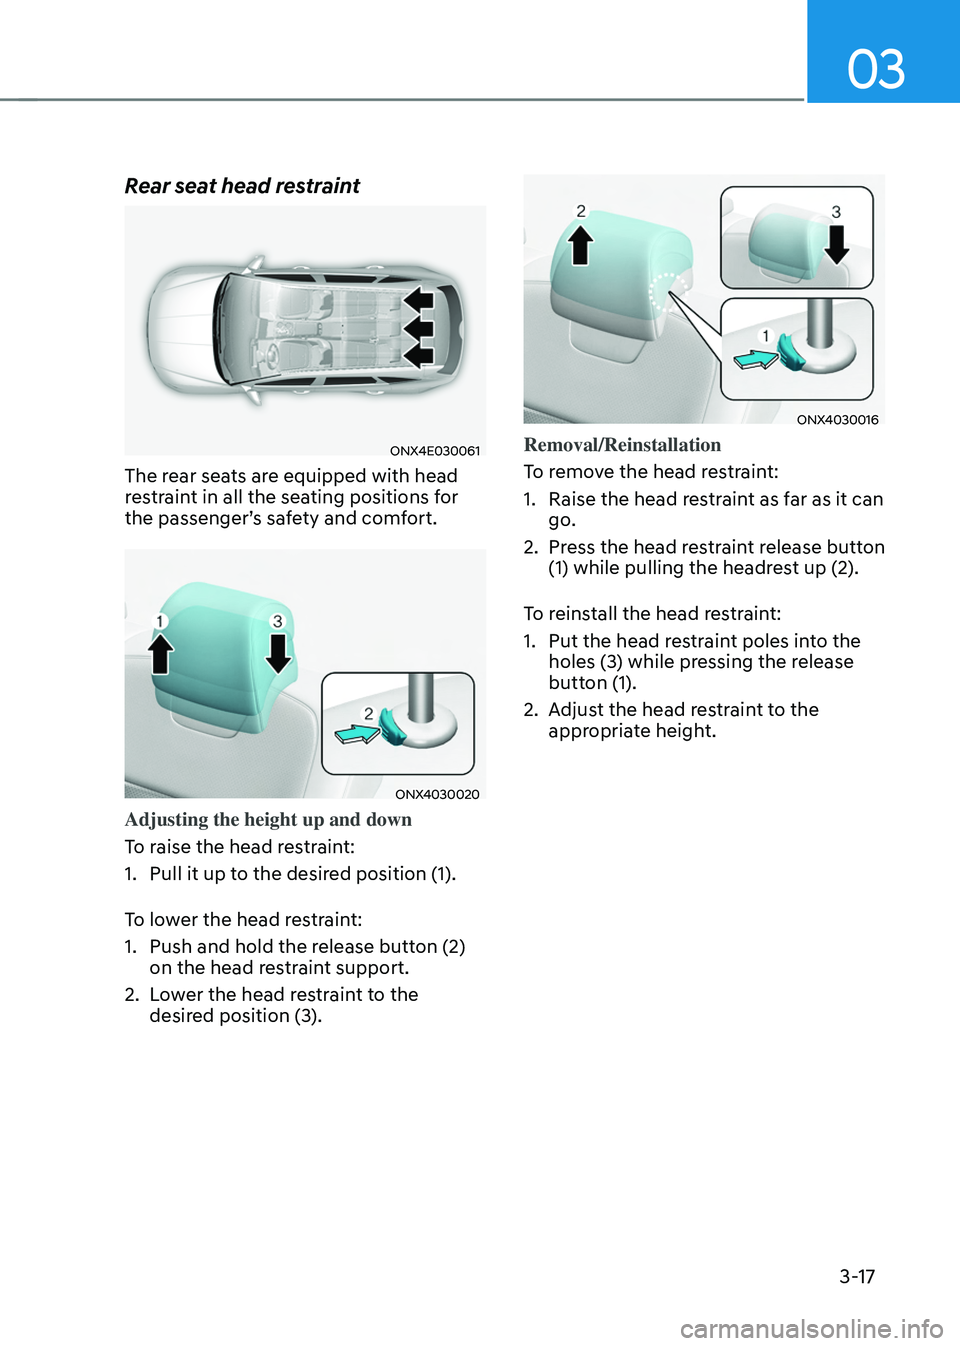 HYUNDAI TUCSON 2022 Service Manual 03
3-17
Rear seat head restraint
ONX4E030061
The rear seats are equipped with head 
restraint in all the seating positions for 
the passenger’s safety and comfort.
ONX4030020
Adjusting the height up